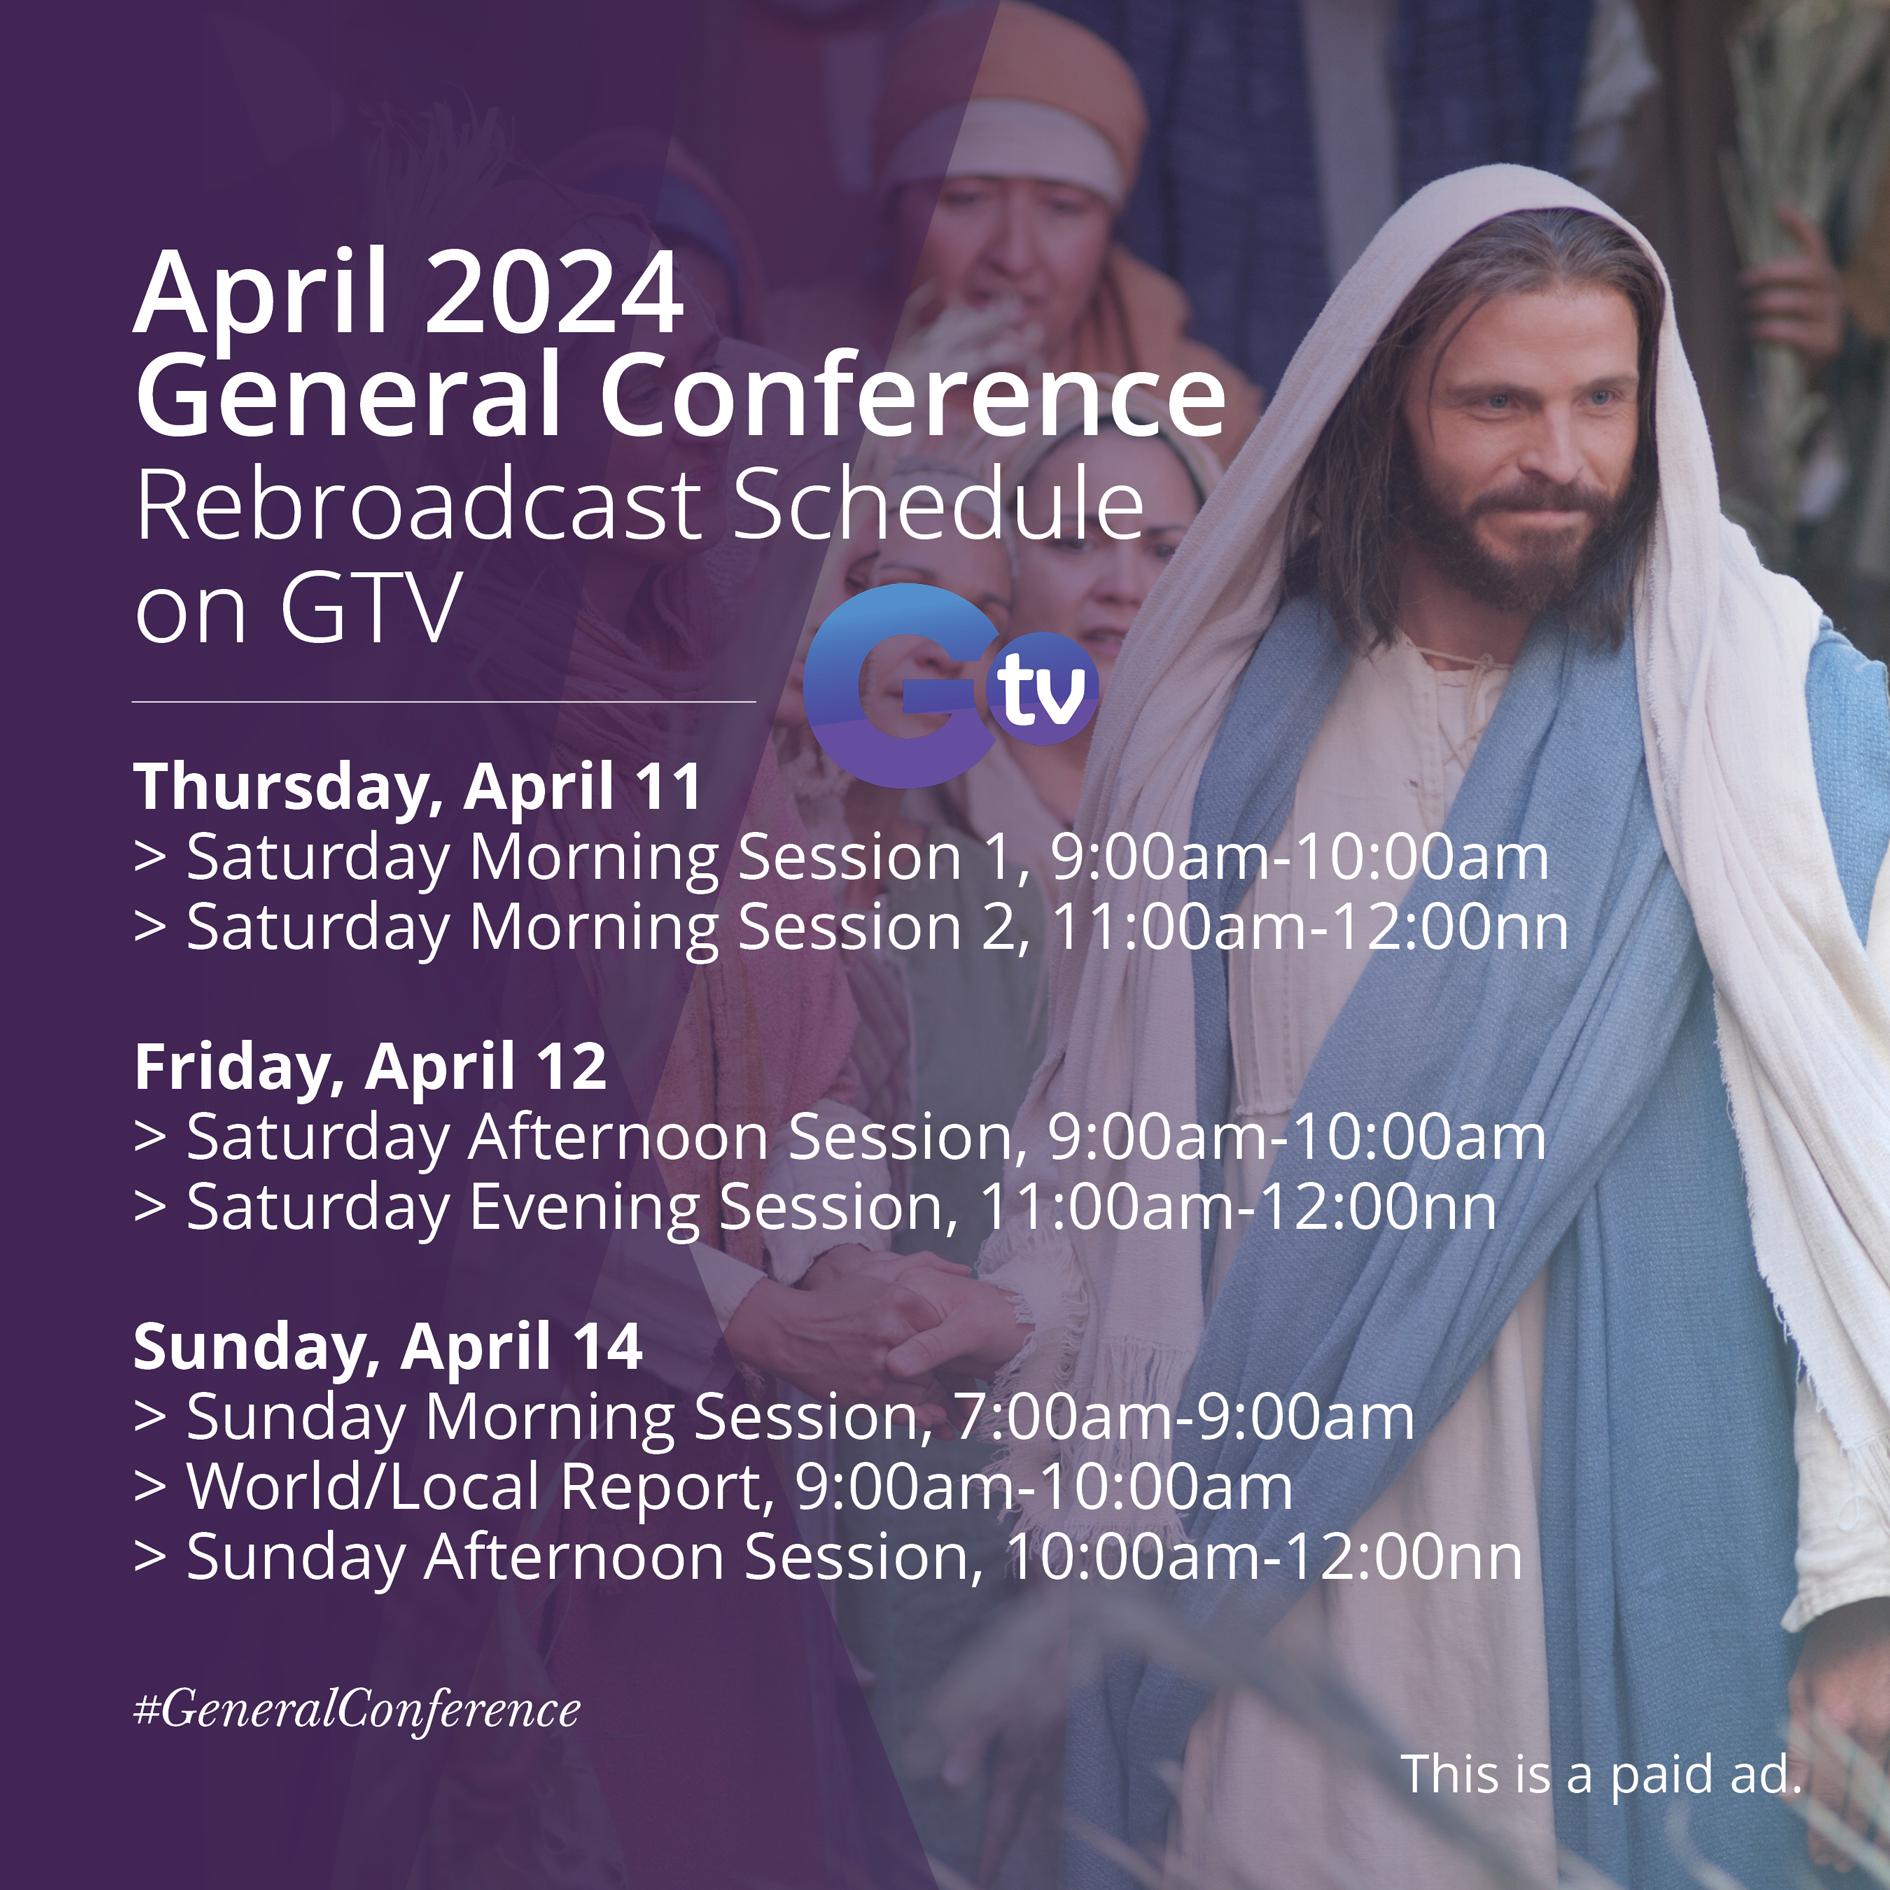 April 2024 General Conference Offers Hope, Joy, and Peace in Jesus Christ